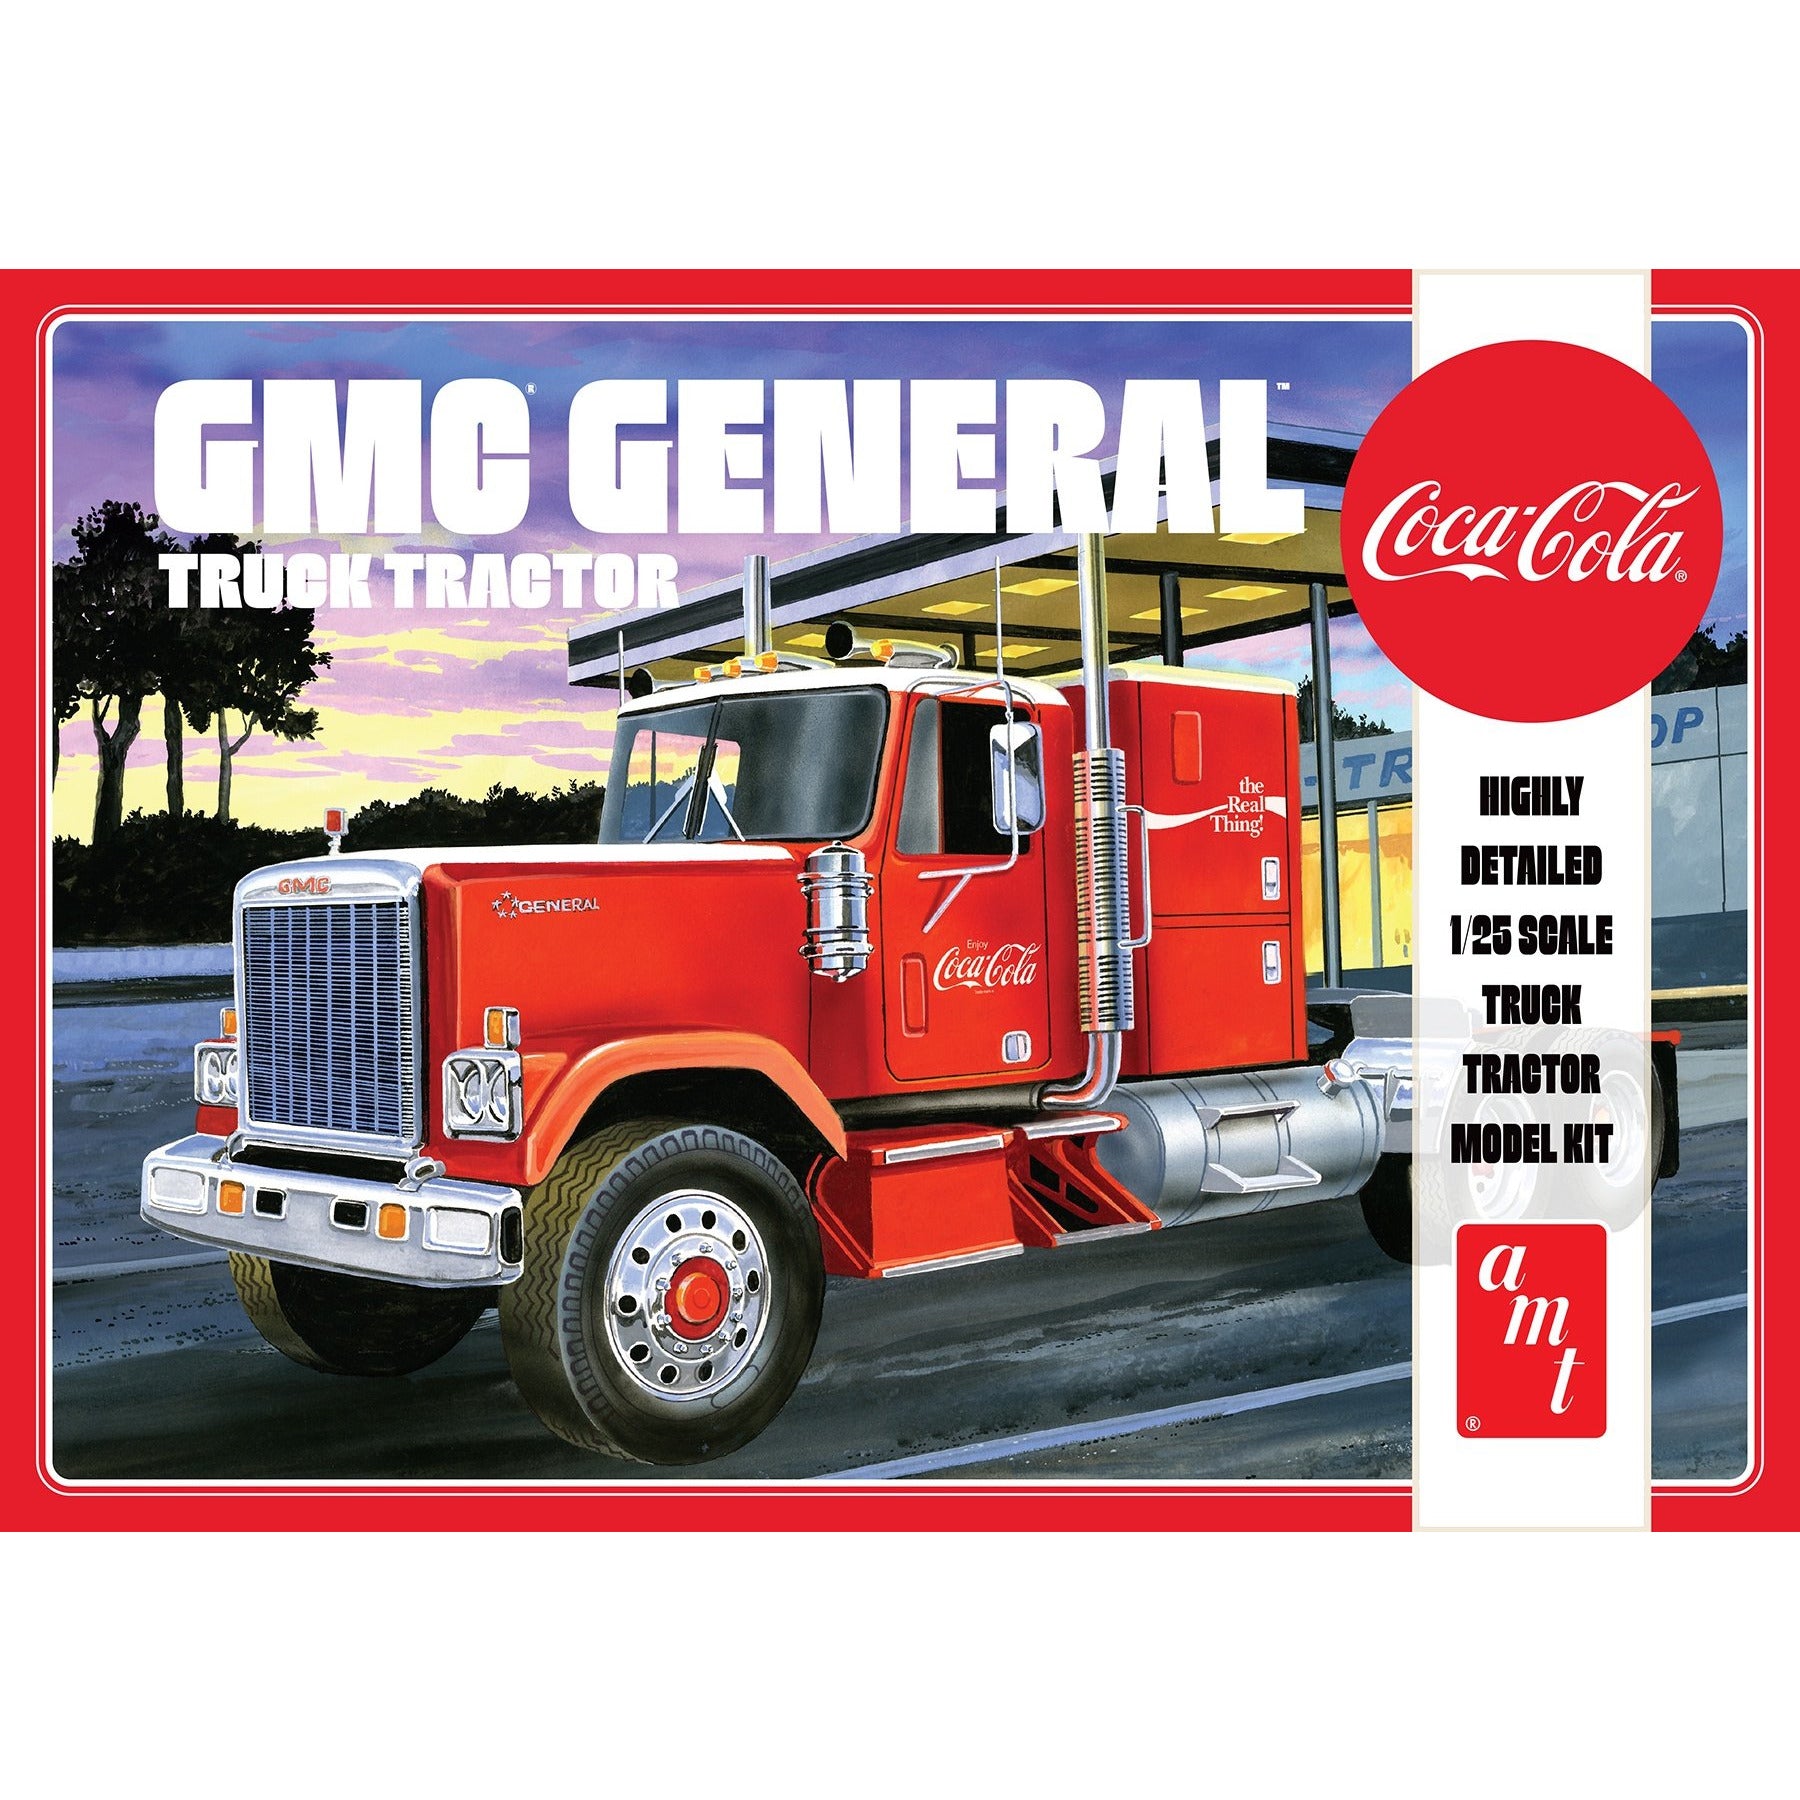 GMC General Truck Tractor Coca-Cola 1/25 Model Truck Kit #1179 by AMT